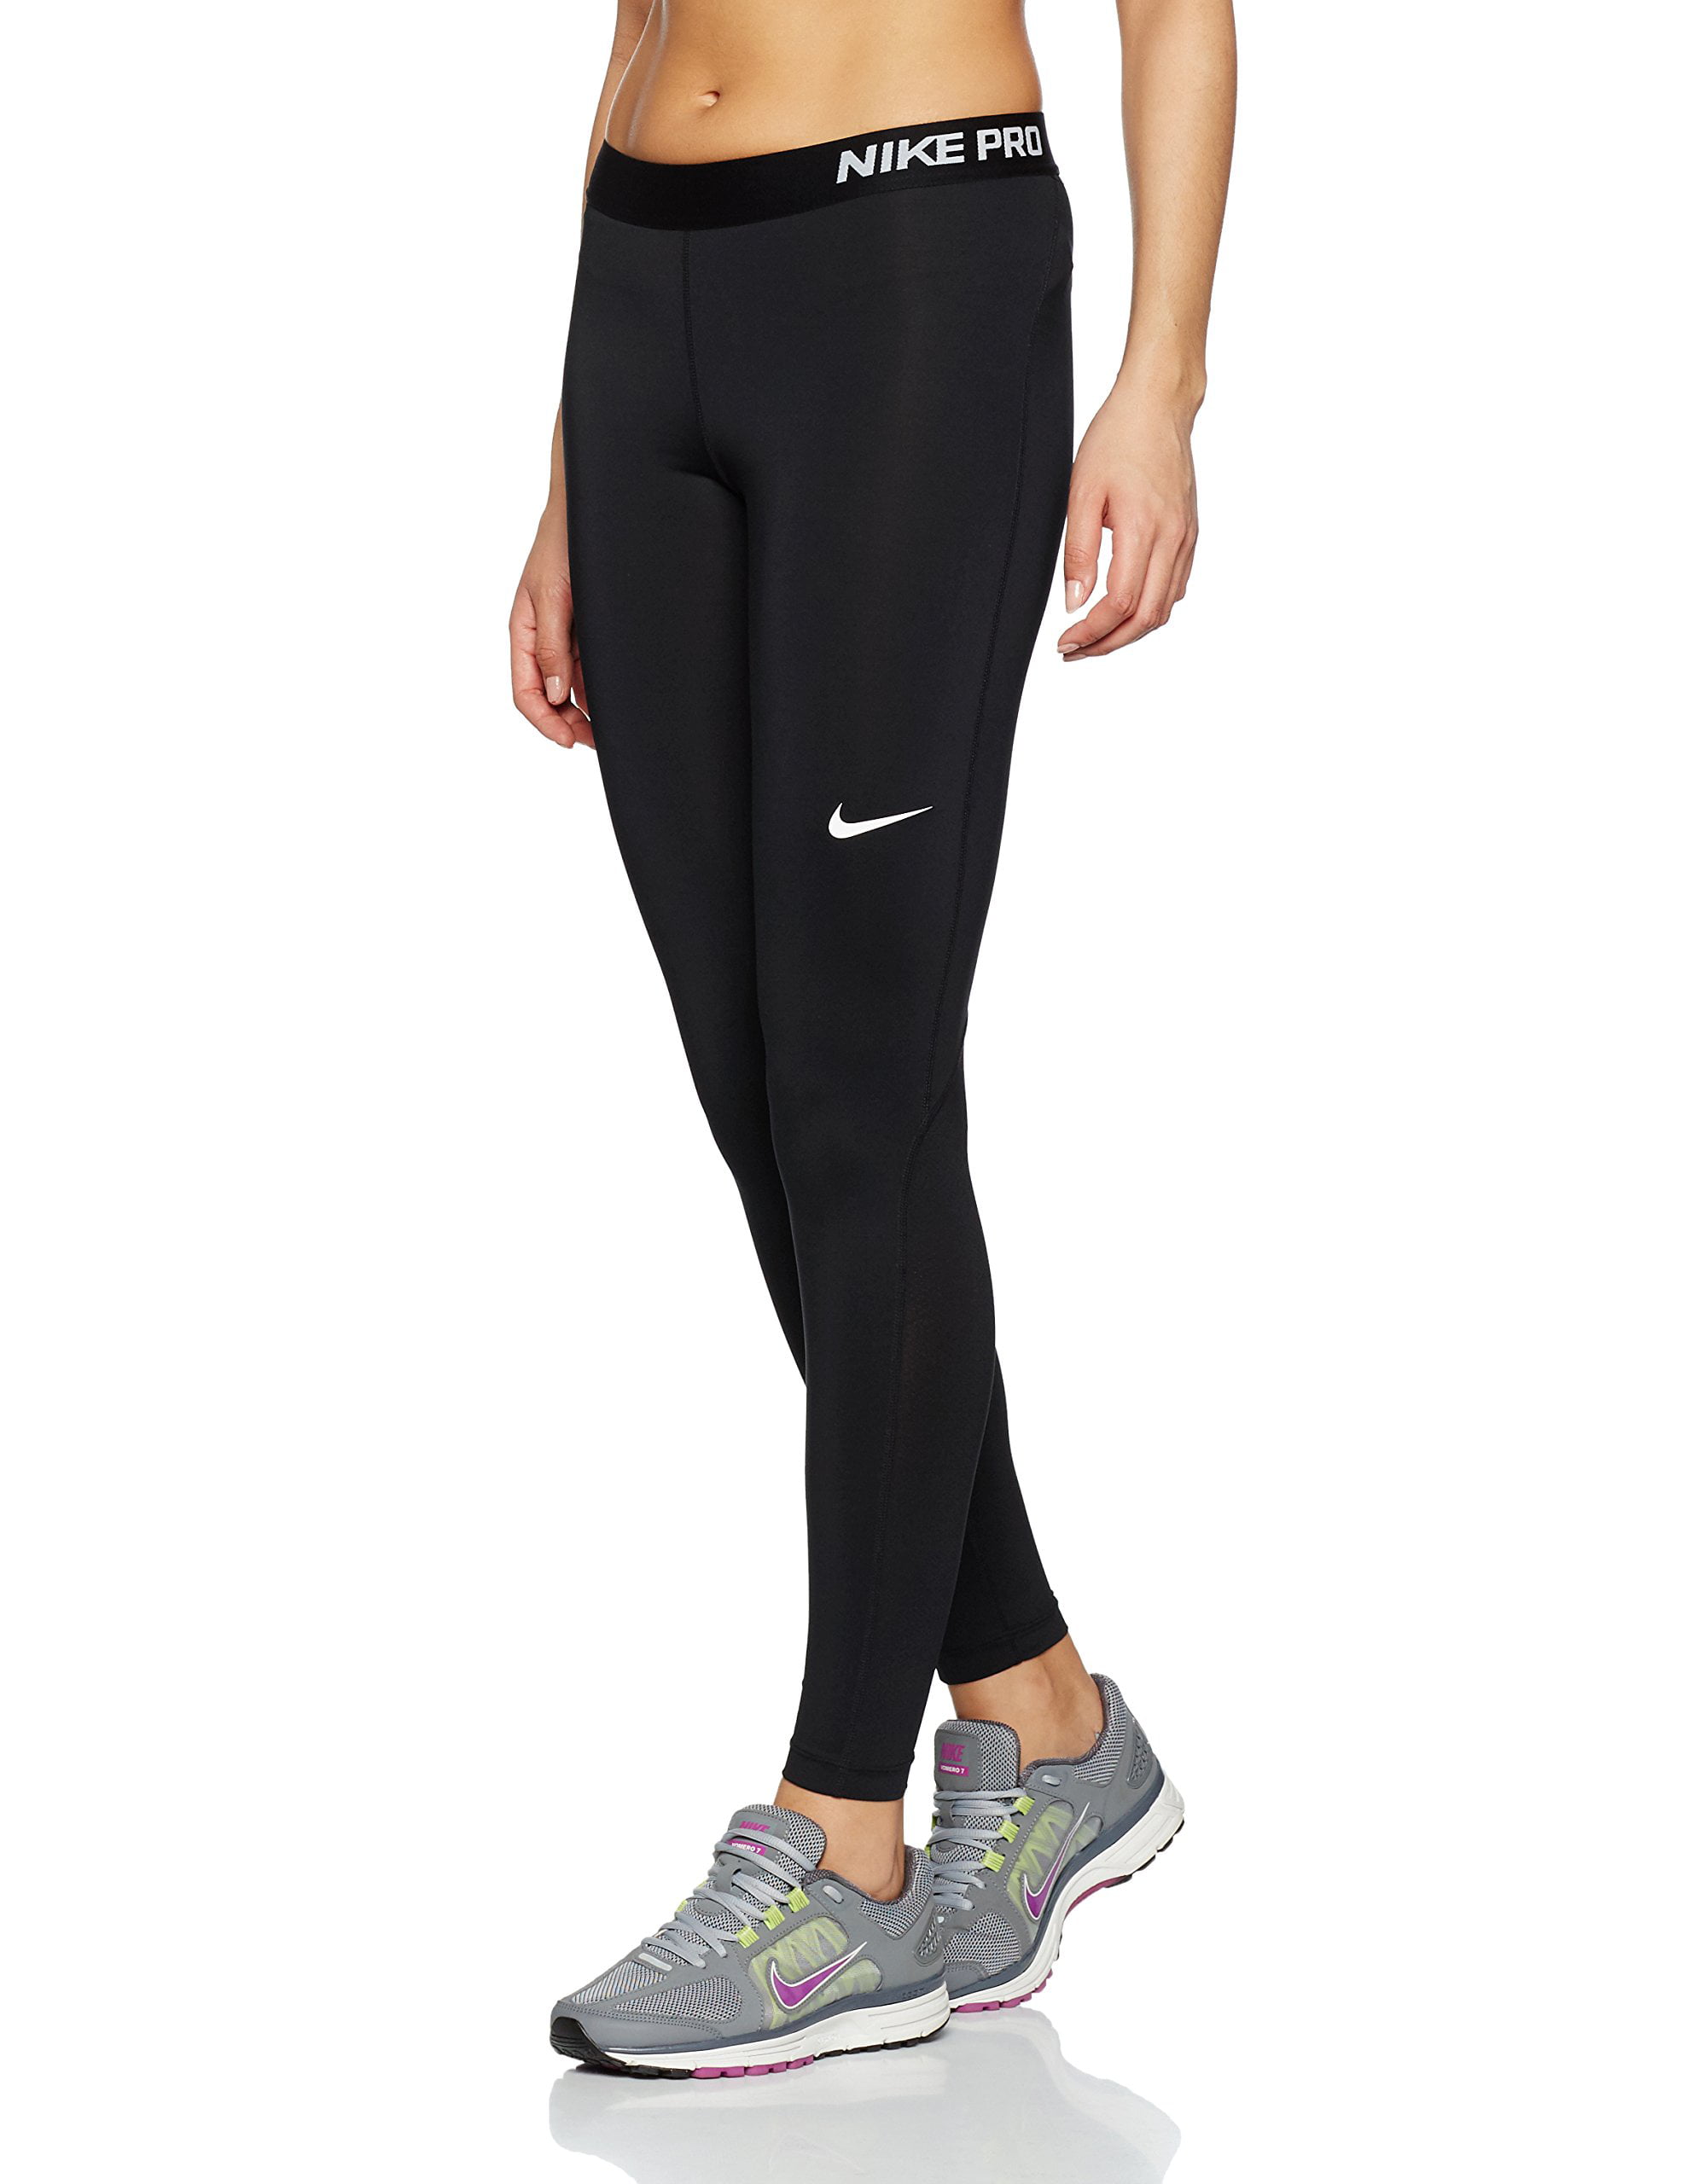 nike womens pro cool training tights black/white 725477-010 size